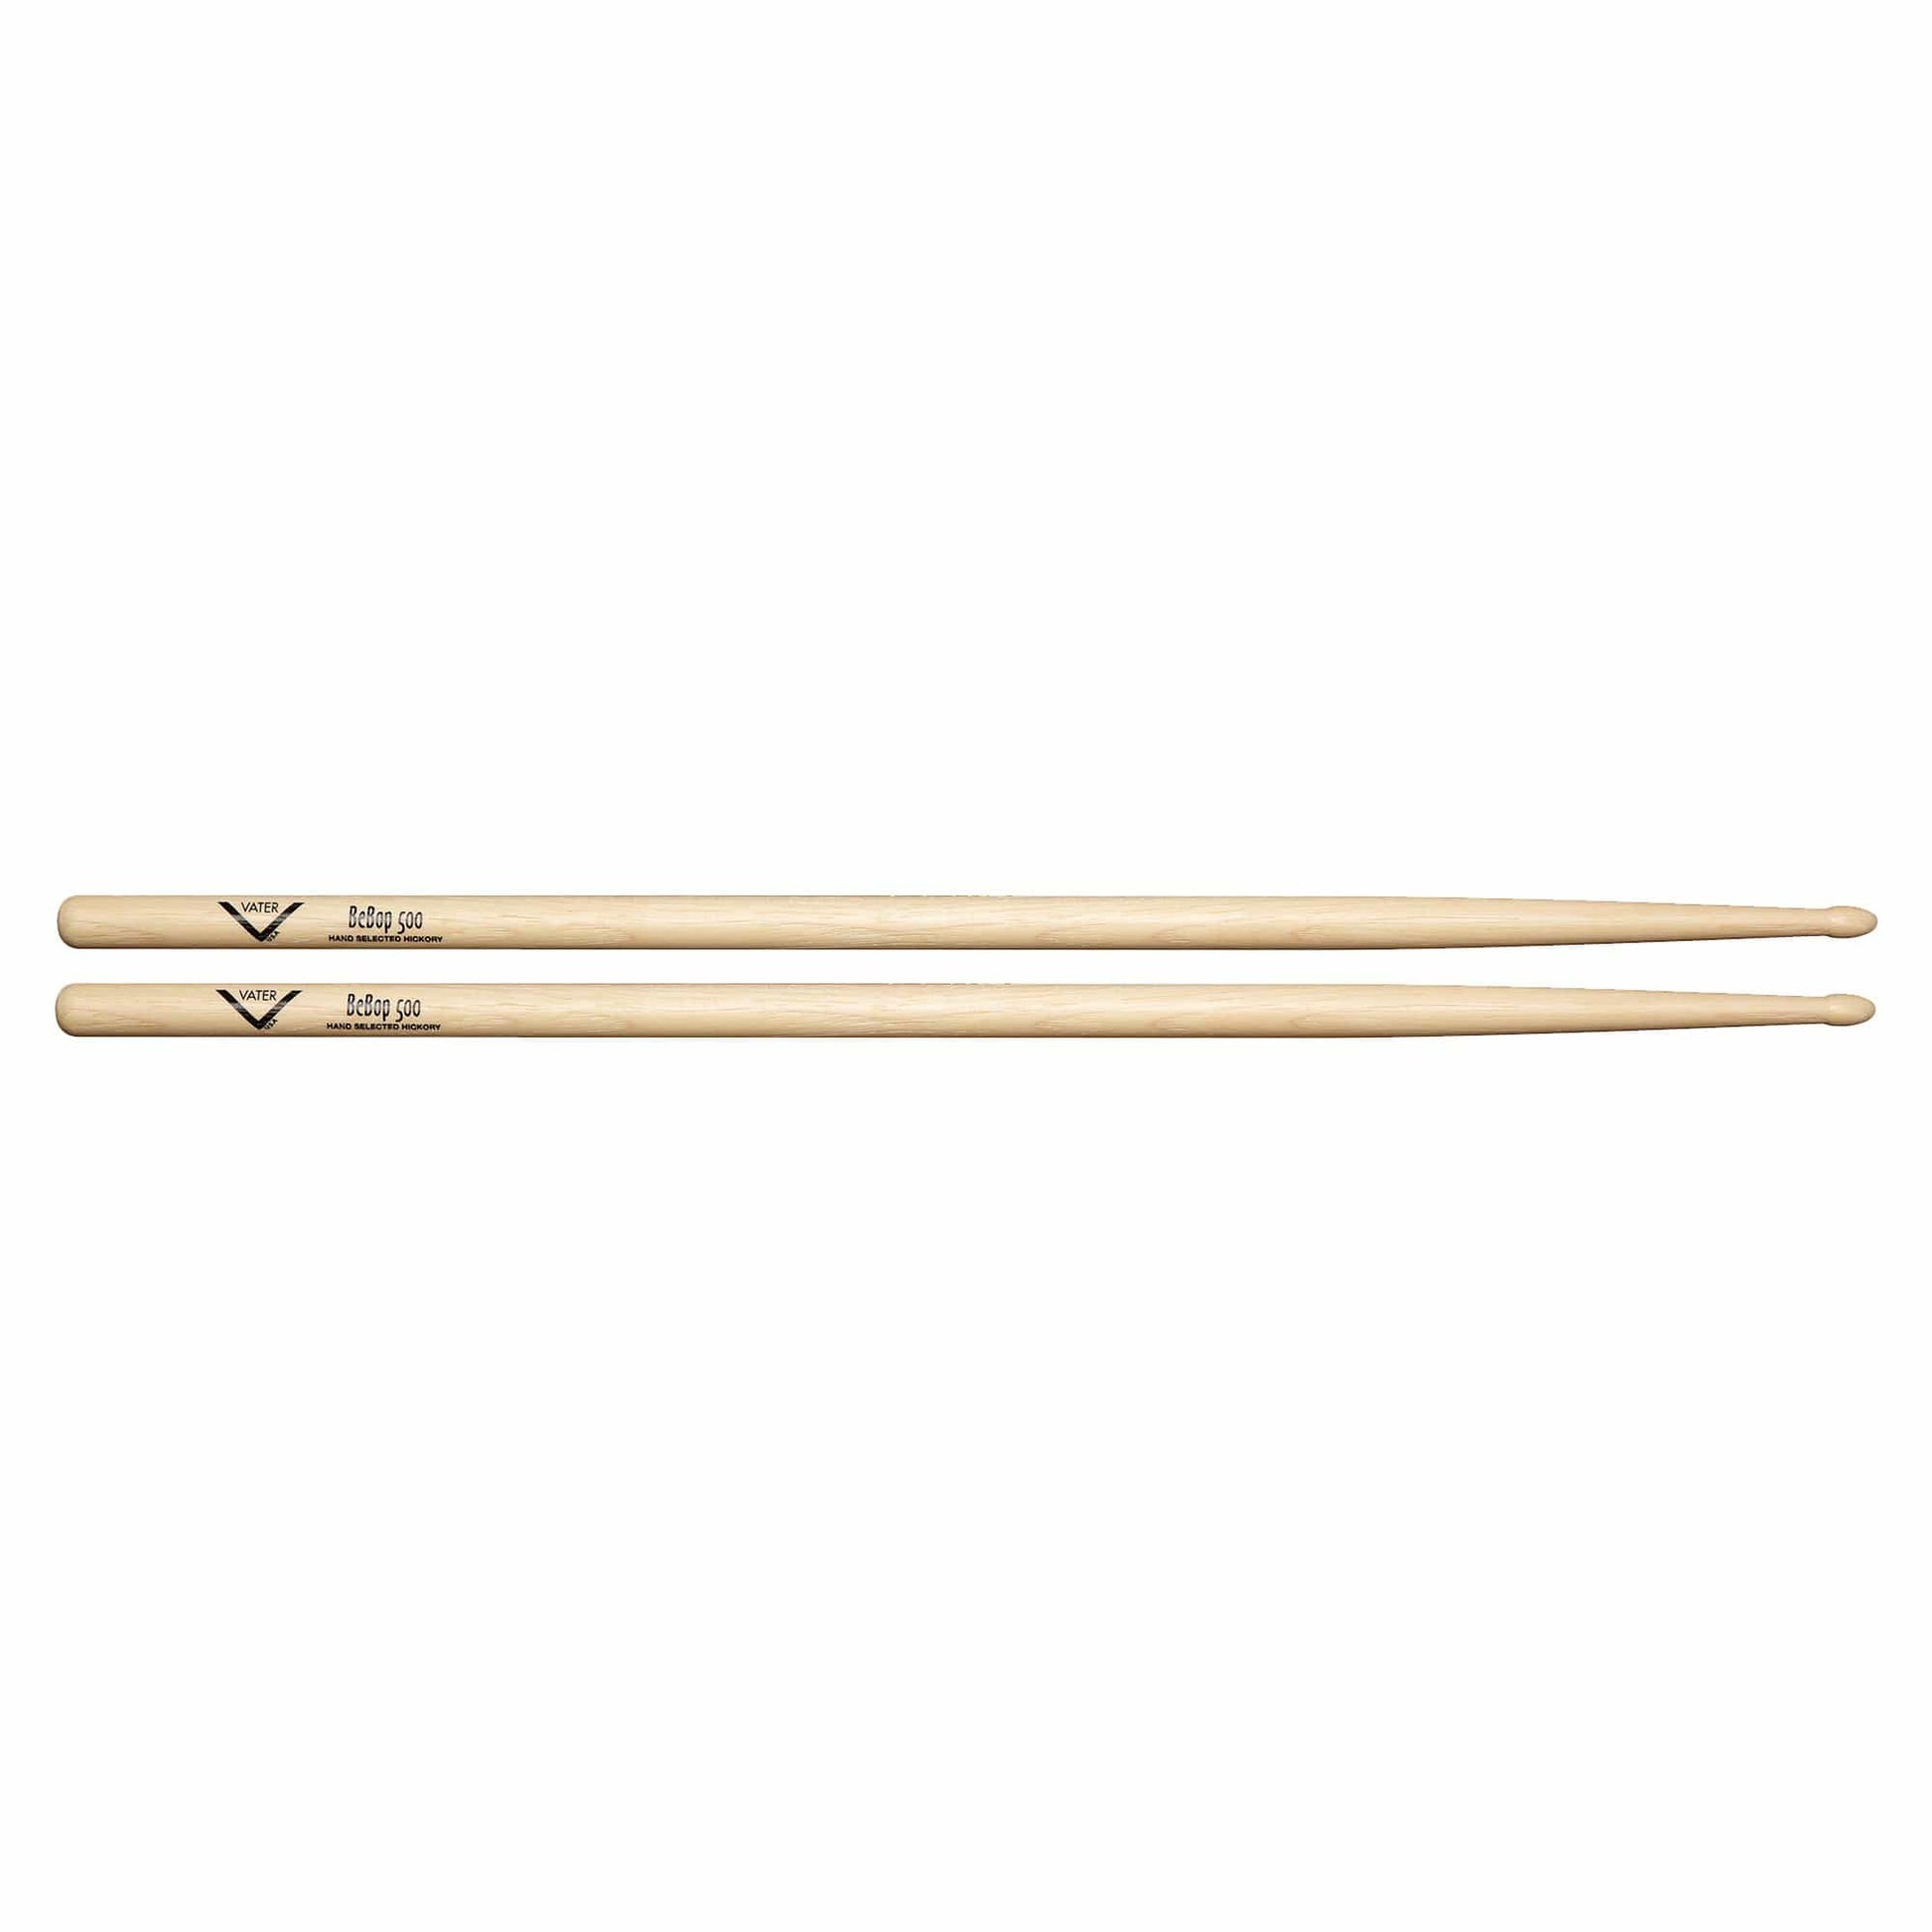 Vater BeBop 500 Drum Sticks Drums and Percussion / Parts and Accessories / Drum Sticks and Mallets